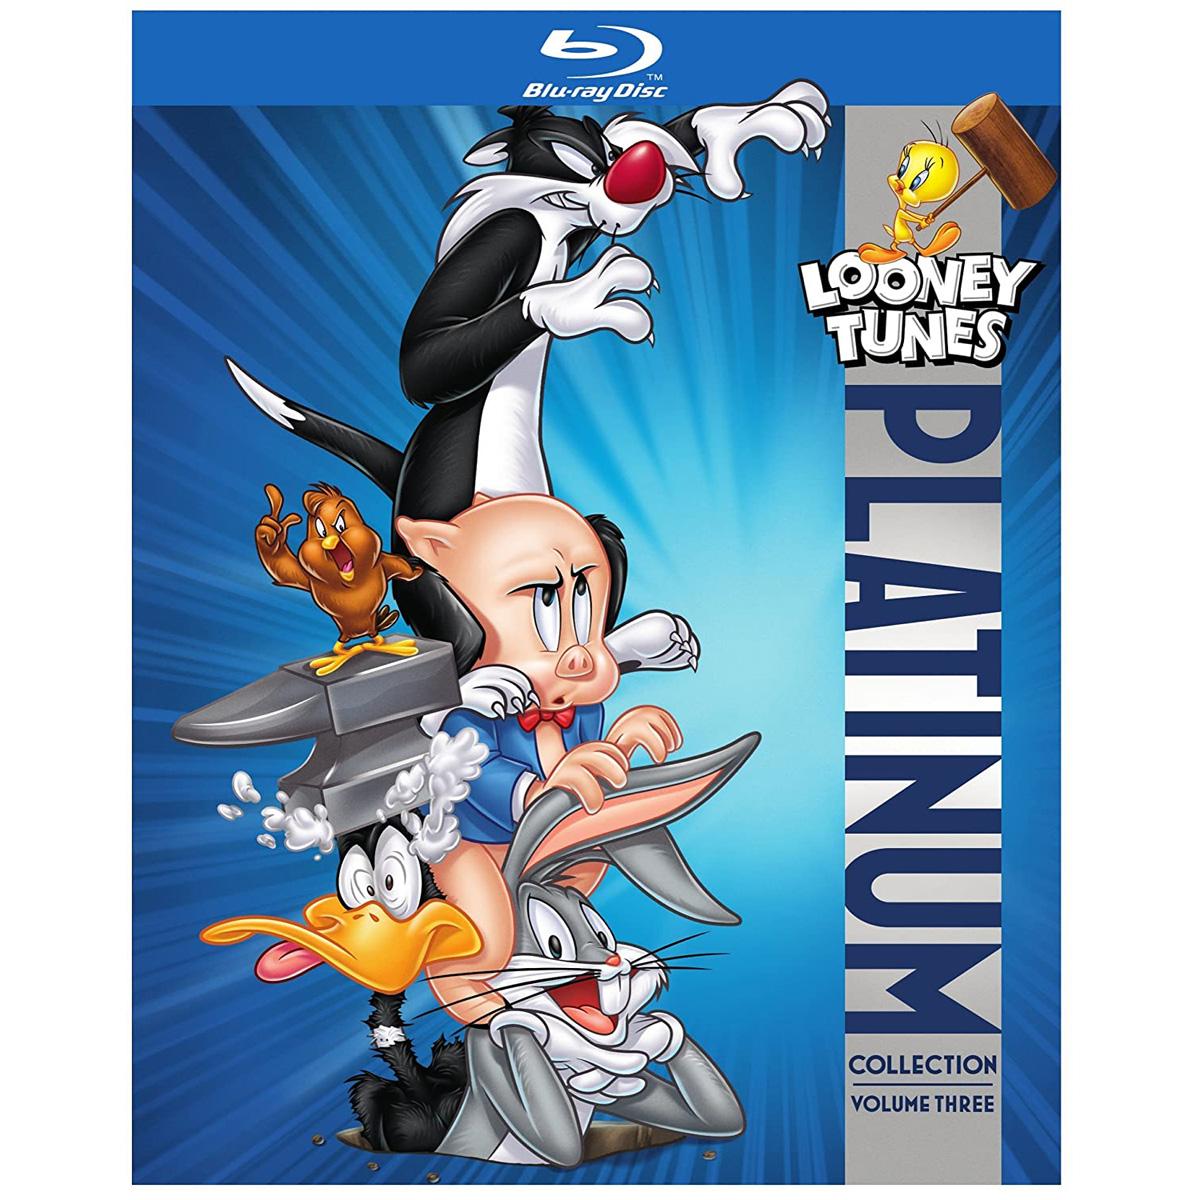 Looney Tunes Platinum Collection Volume 3 Blu-ray for $18